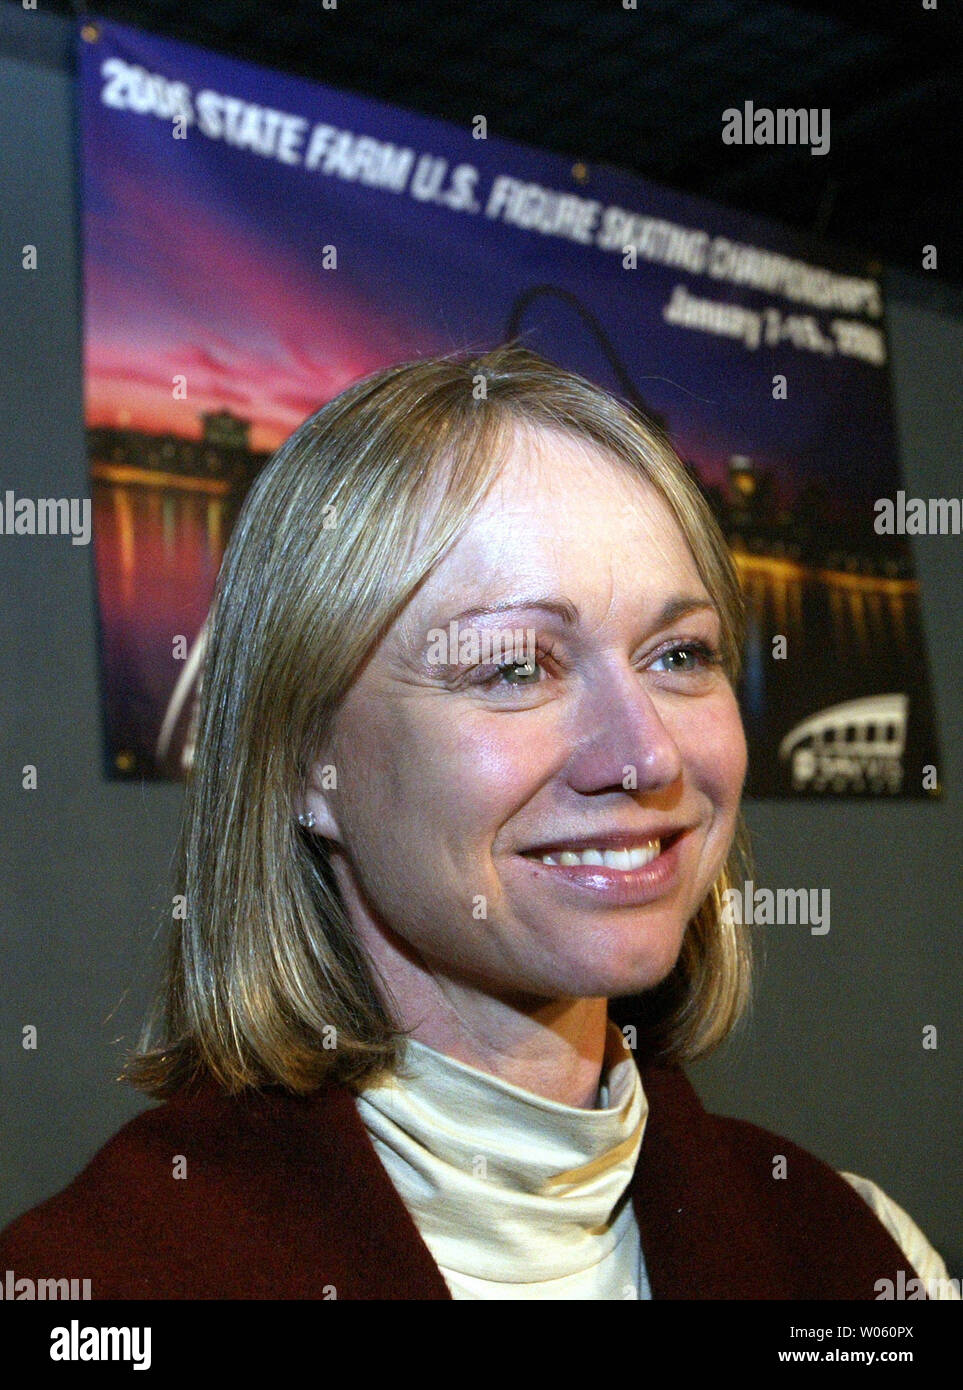 Former United States Olympic figure skating champion Lea Ann Miller talks with reporters on February 10, 2005 at the Savvis Center following the announcement that the 2006 U.S. figure skating championships will be held in St. Louis. A St. Louis native, Miller and her partner Bill Fauver earned three silver medals and one bronz at the U.S. Figure Skating Championships between 1981-84 and represented the United States at four World competitions. Miller and Fauver also represented the United States at the 1984 Olympic  Games in Sarajevo. (UPI Photo/Bill Greenblatt) Stock Photo